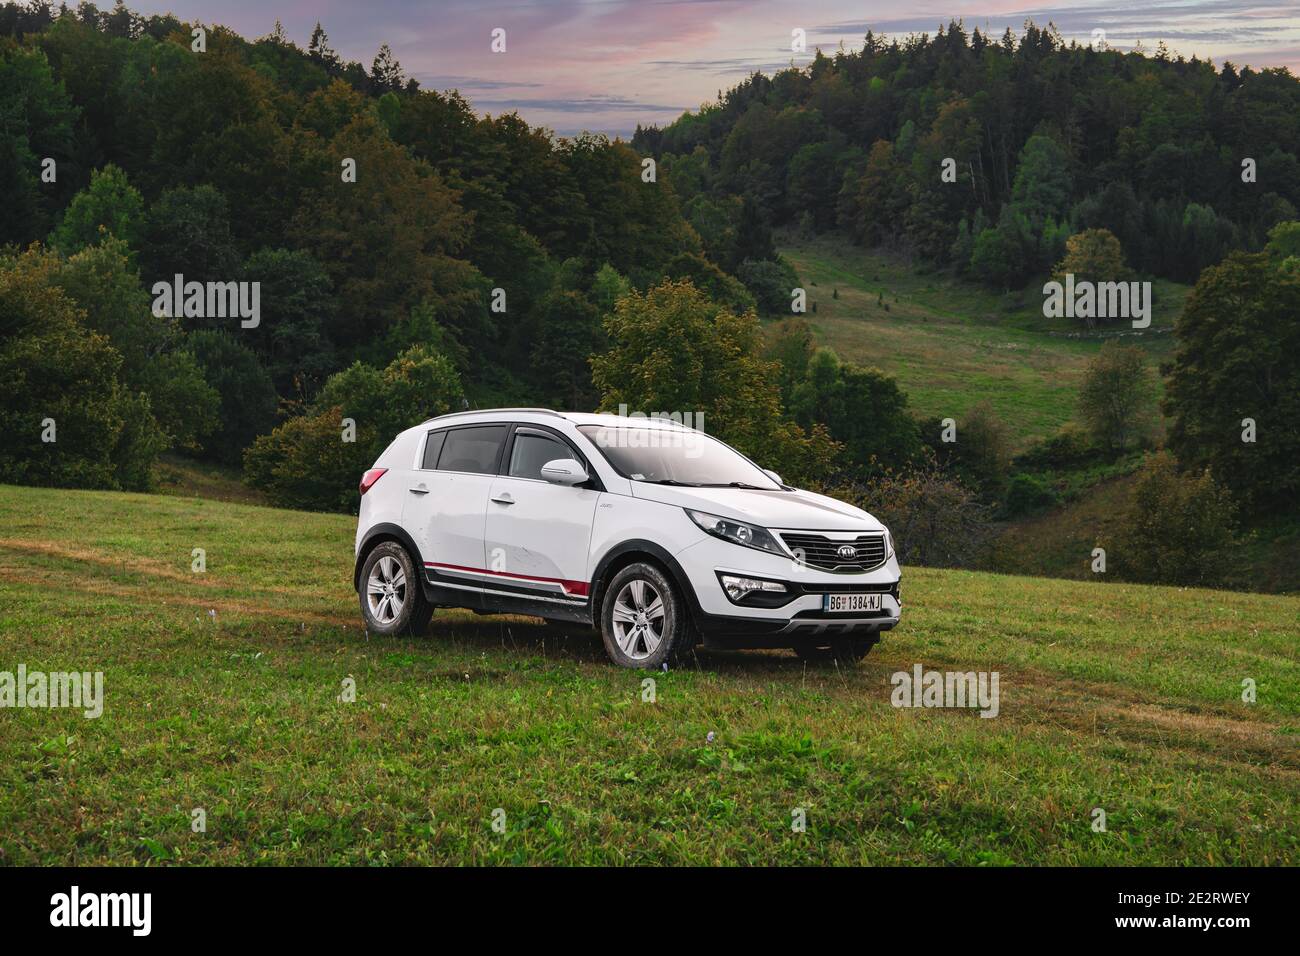 Kia Sportage 2.0 CRDI awd or 4x4, white color, parked on a gravel road, with beautiful orange sunset in the background.  Best car for off road.Zaovine Stock Photo